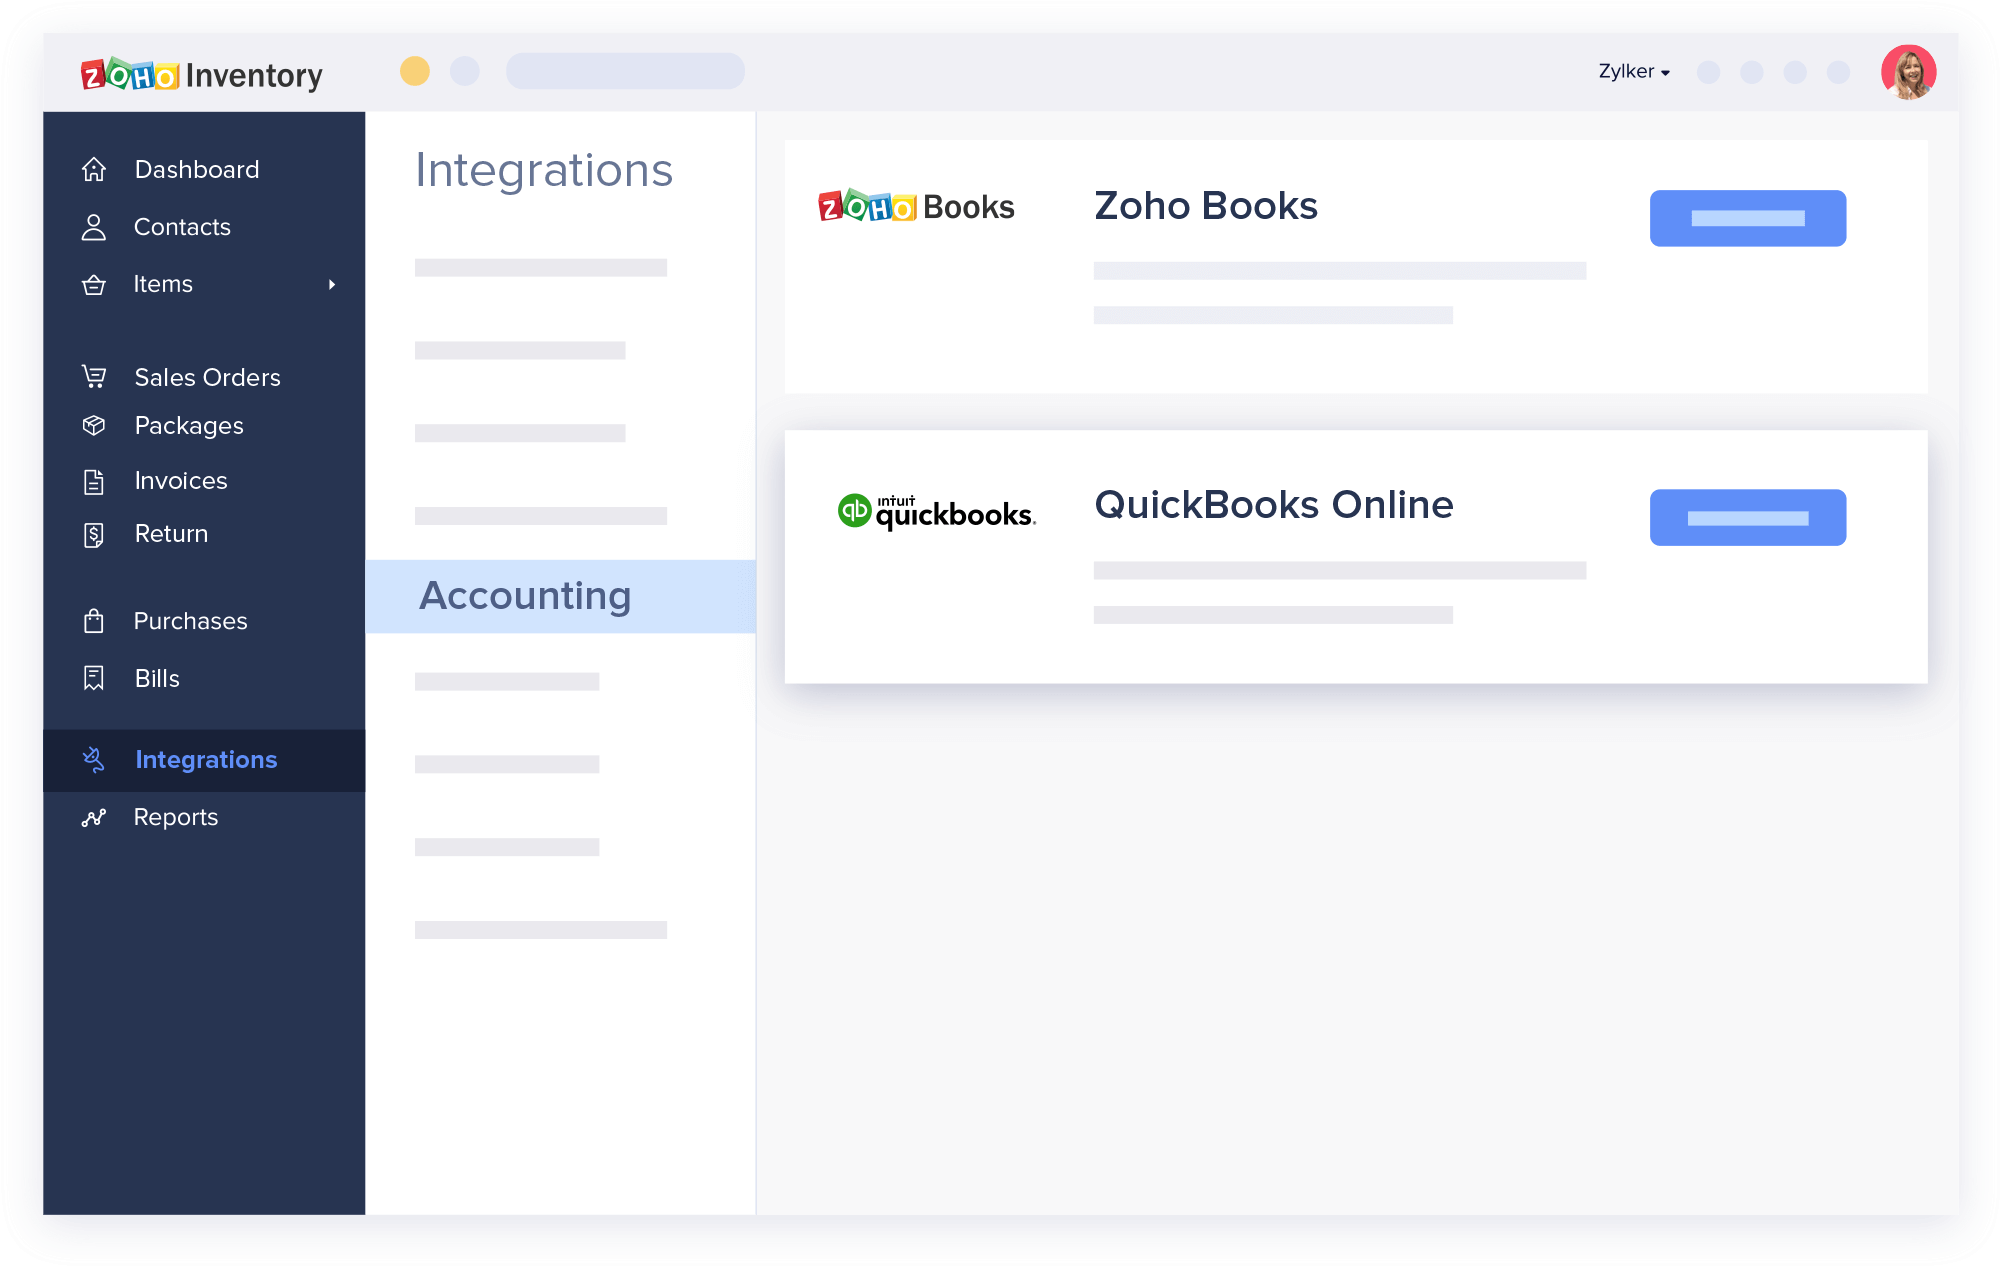 turn off inventory tracking quickbooks